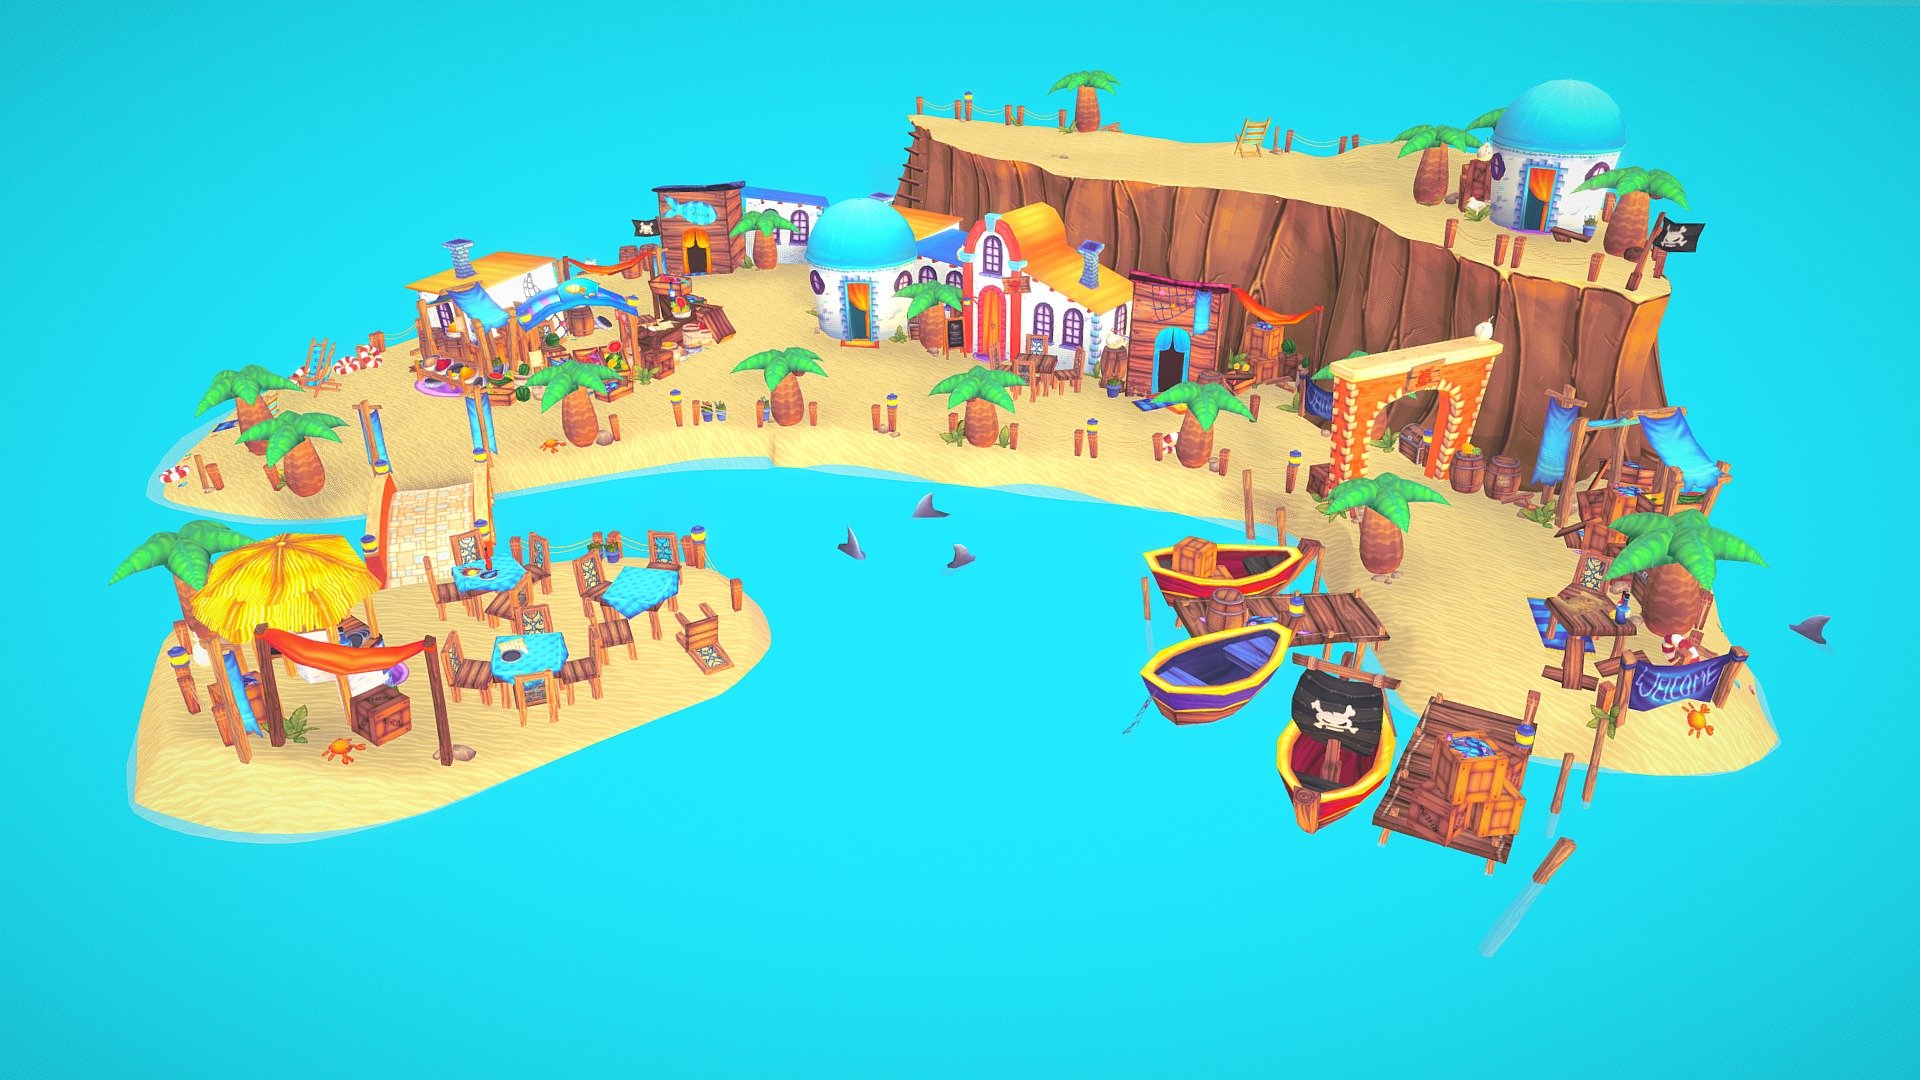 Welcome to Pirates Bay, paradisiac island, to vacacions !
Model exported from Unity Engine, diffuses only (with an alpha sometimes)

I made this old scene for end school's project, I wanted to reproduce some assets from &ldquo;Fantasy Life